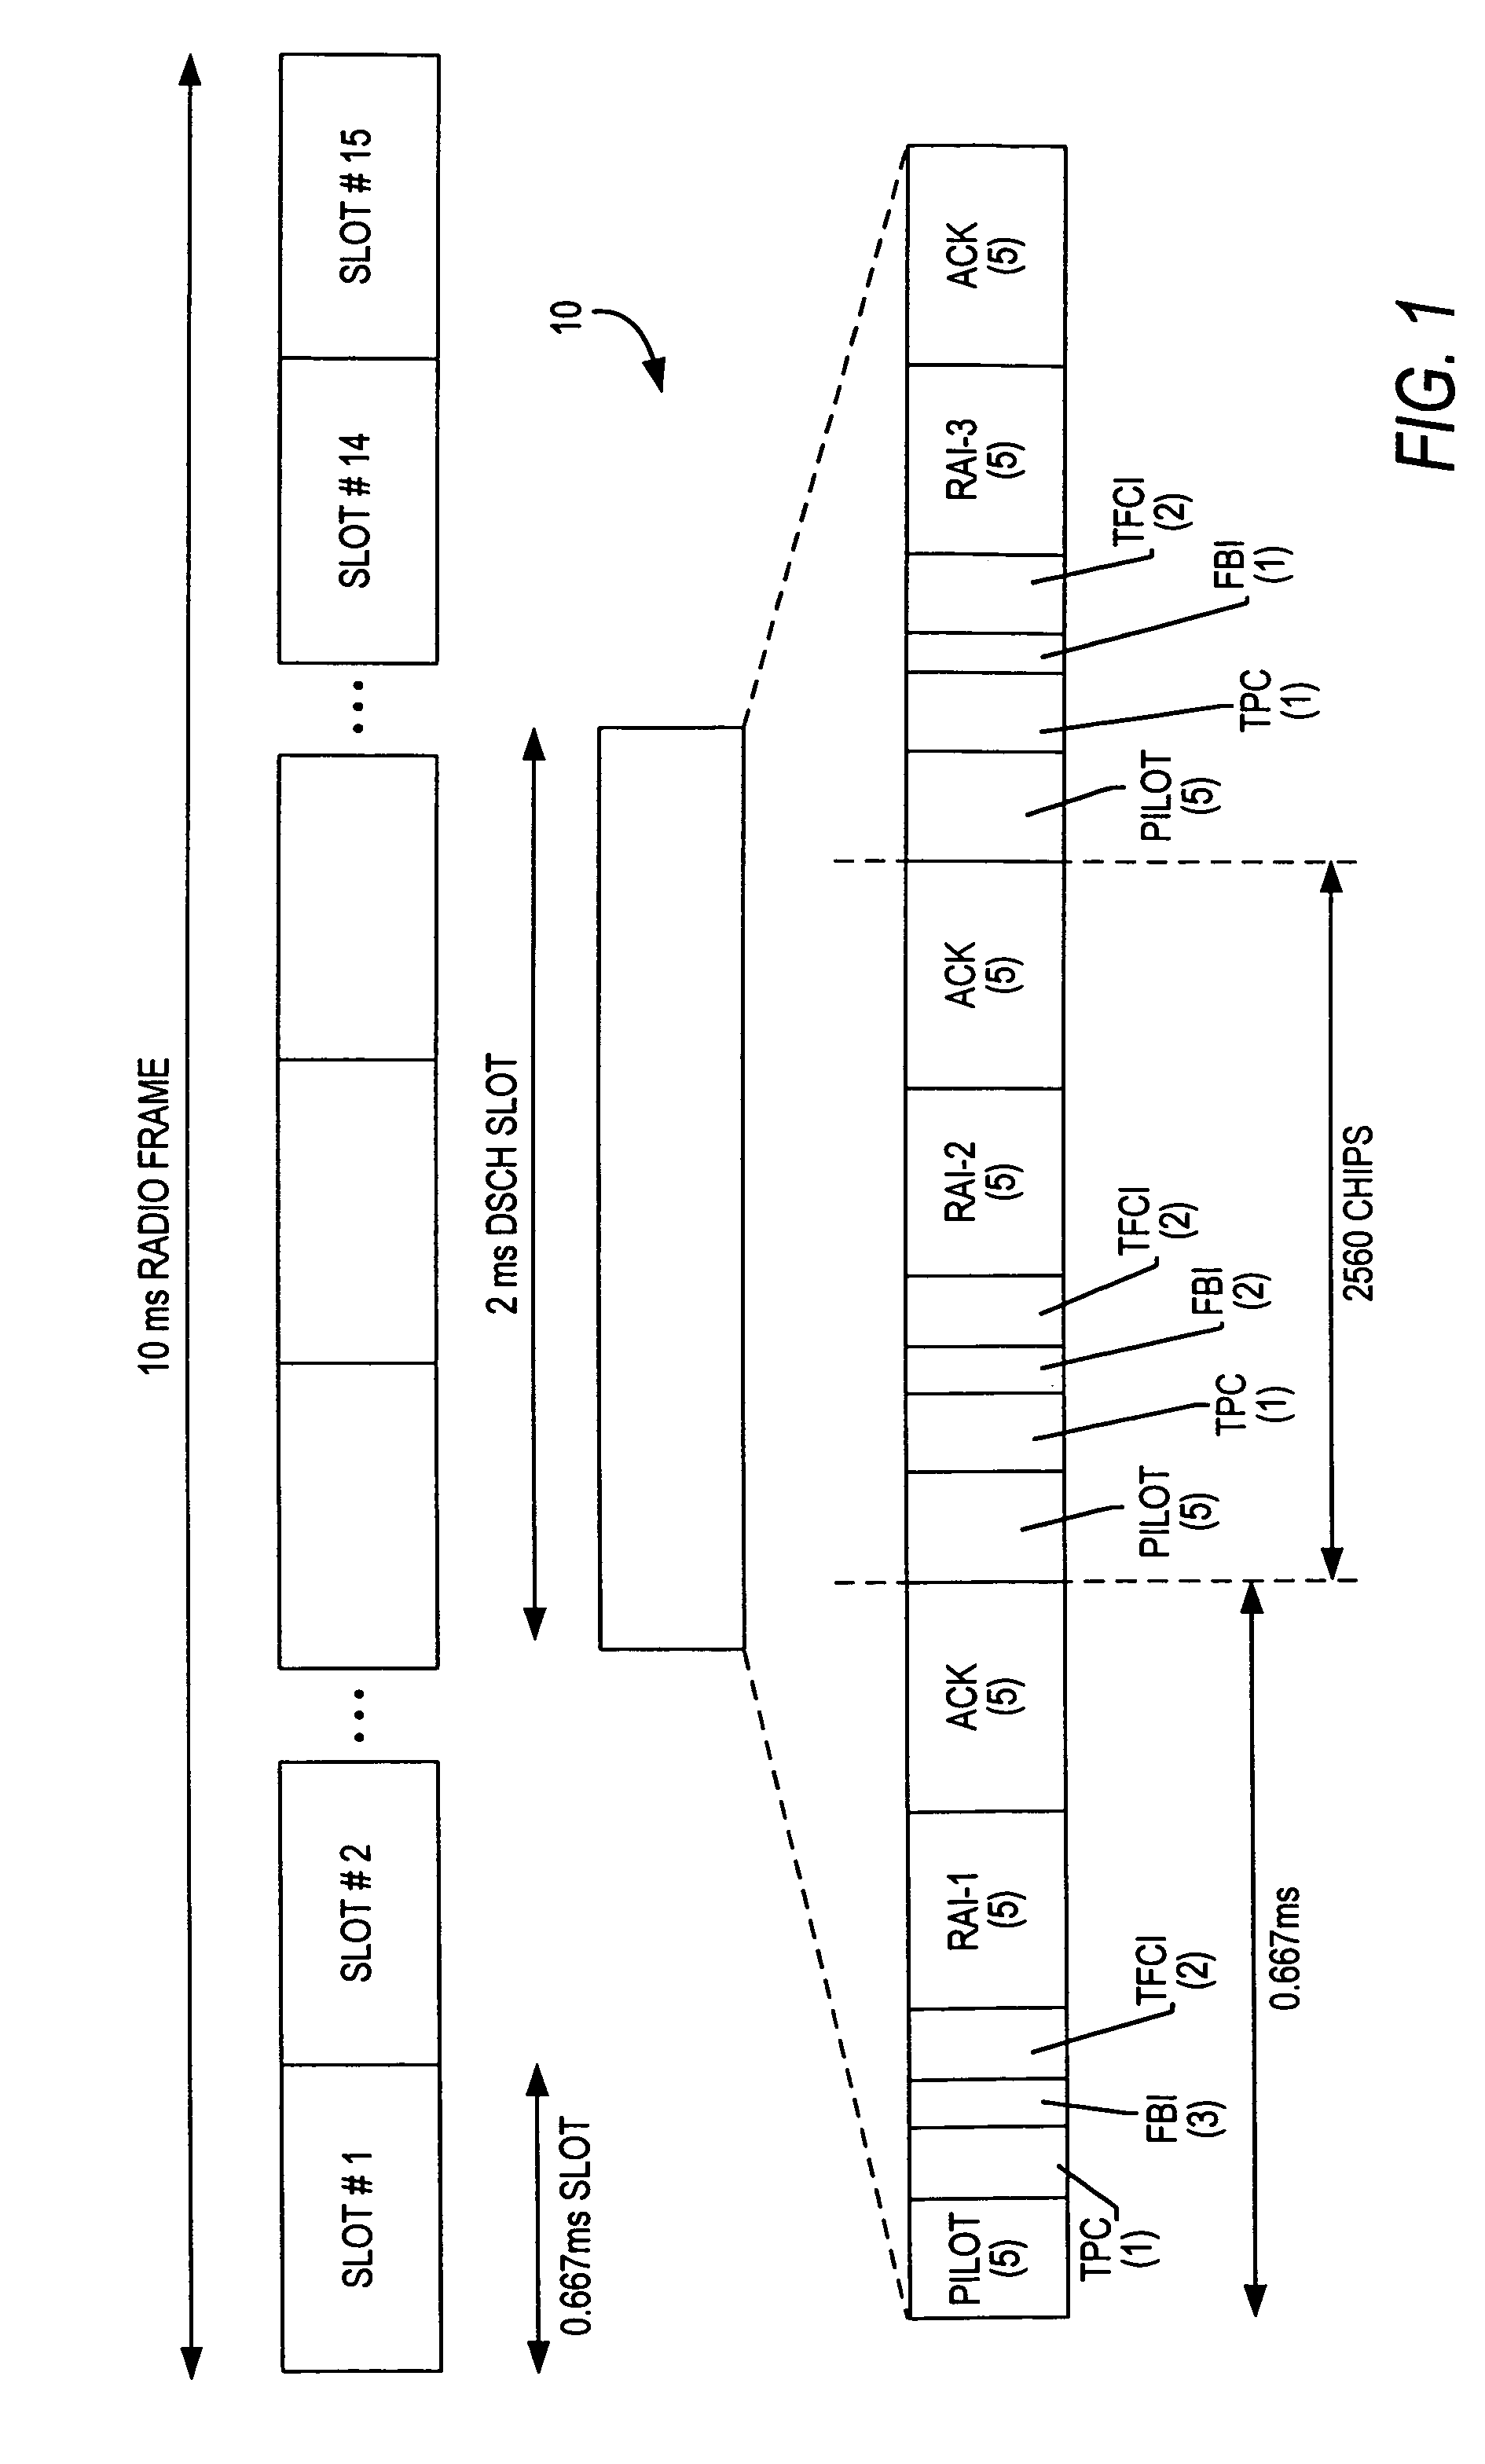 Downlink and uplink channel structures for downlink shared channel system